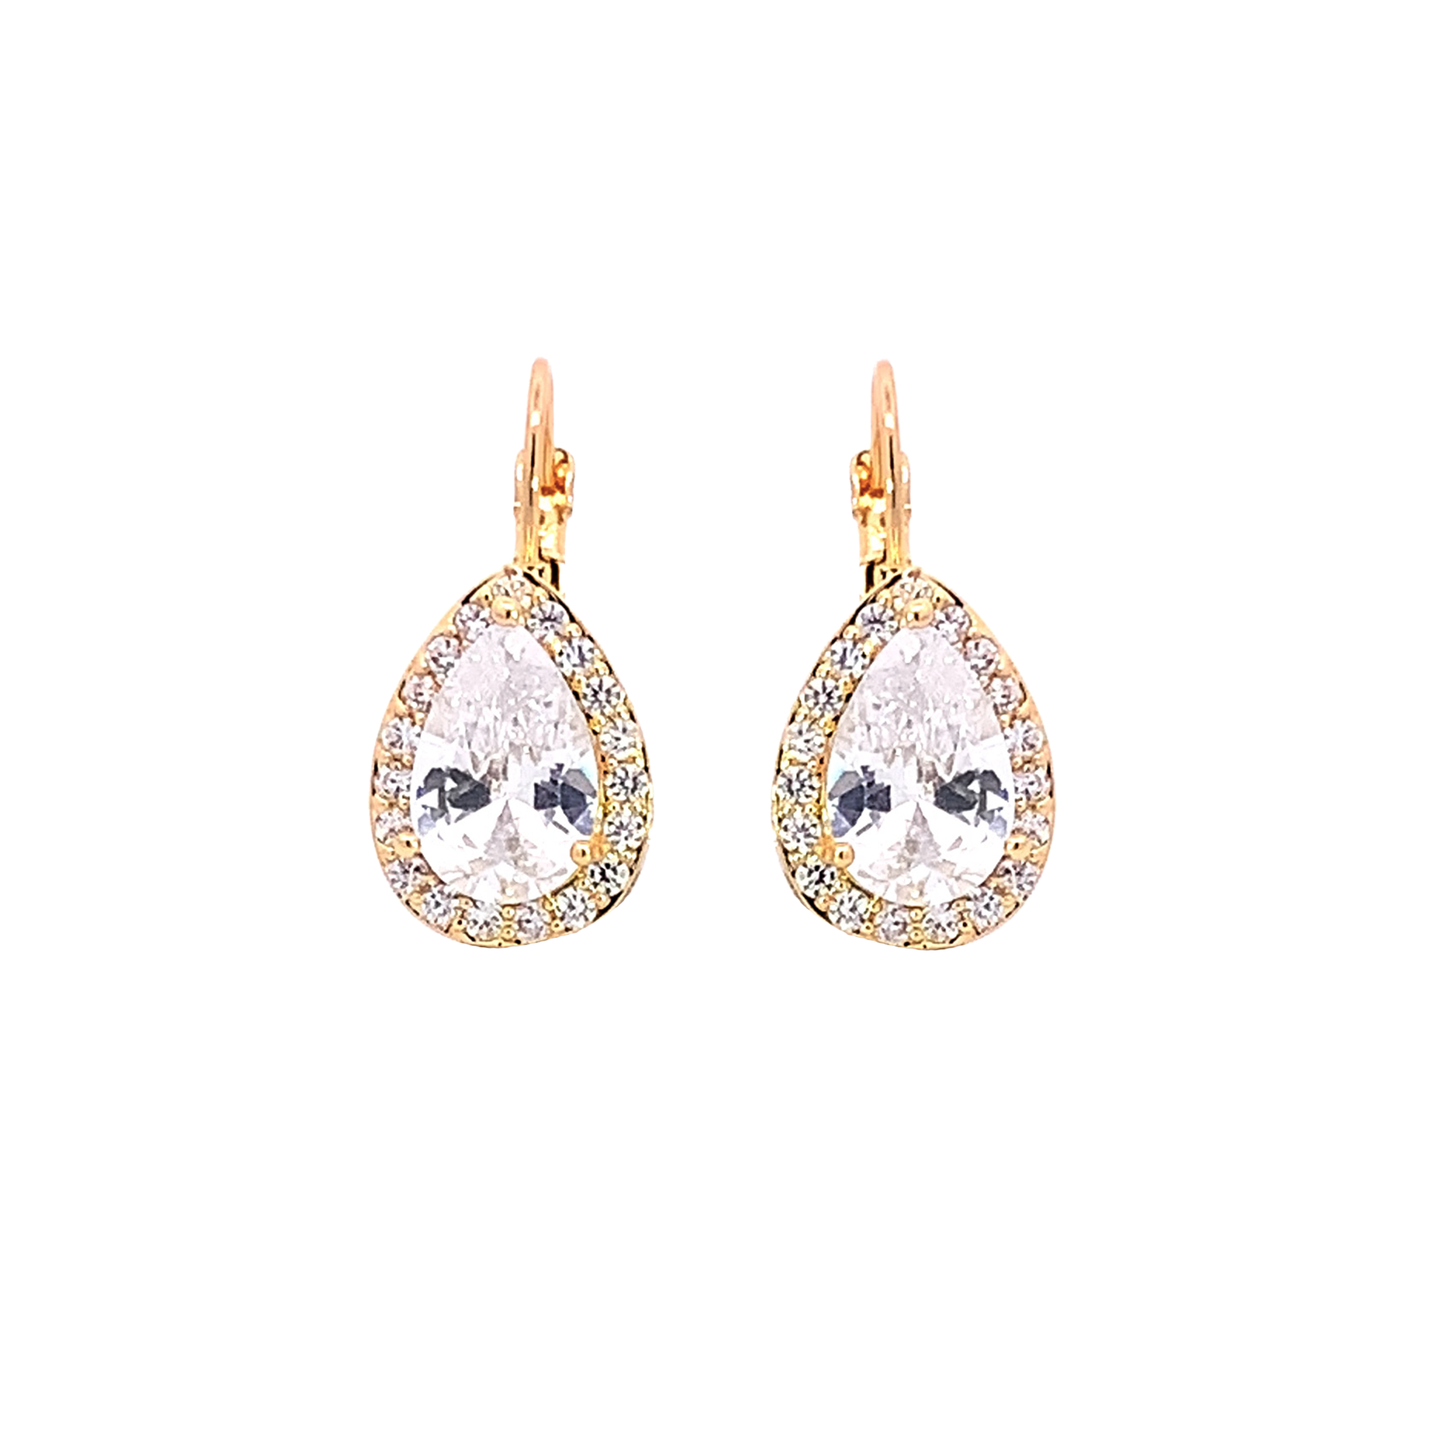 pear shaped crystal drop earrings with lever back posts in gold